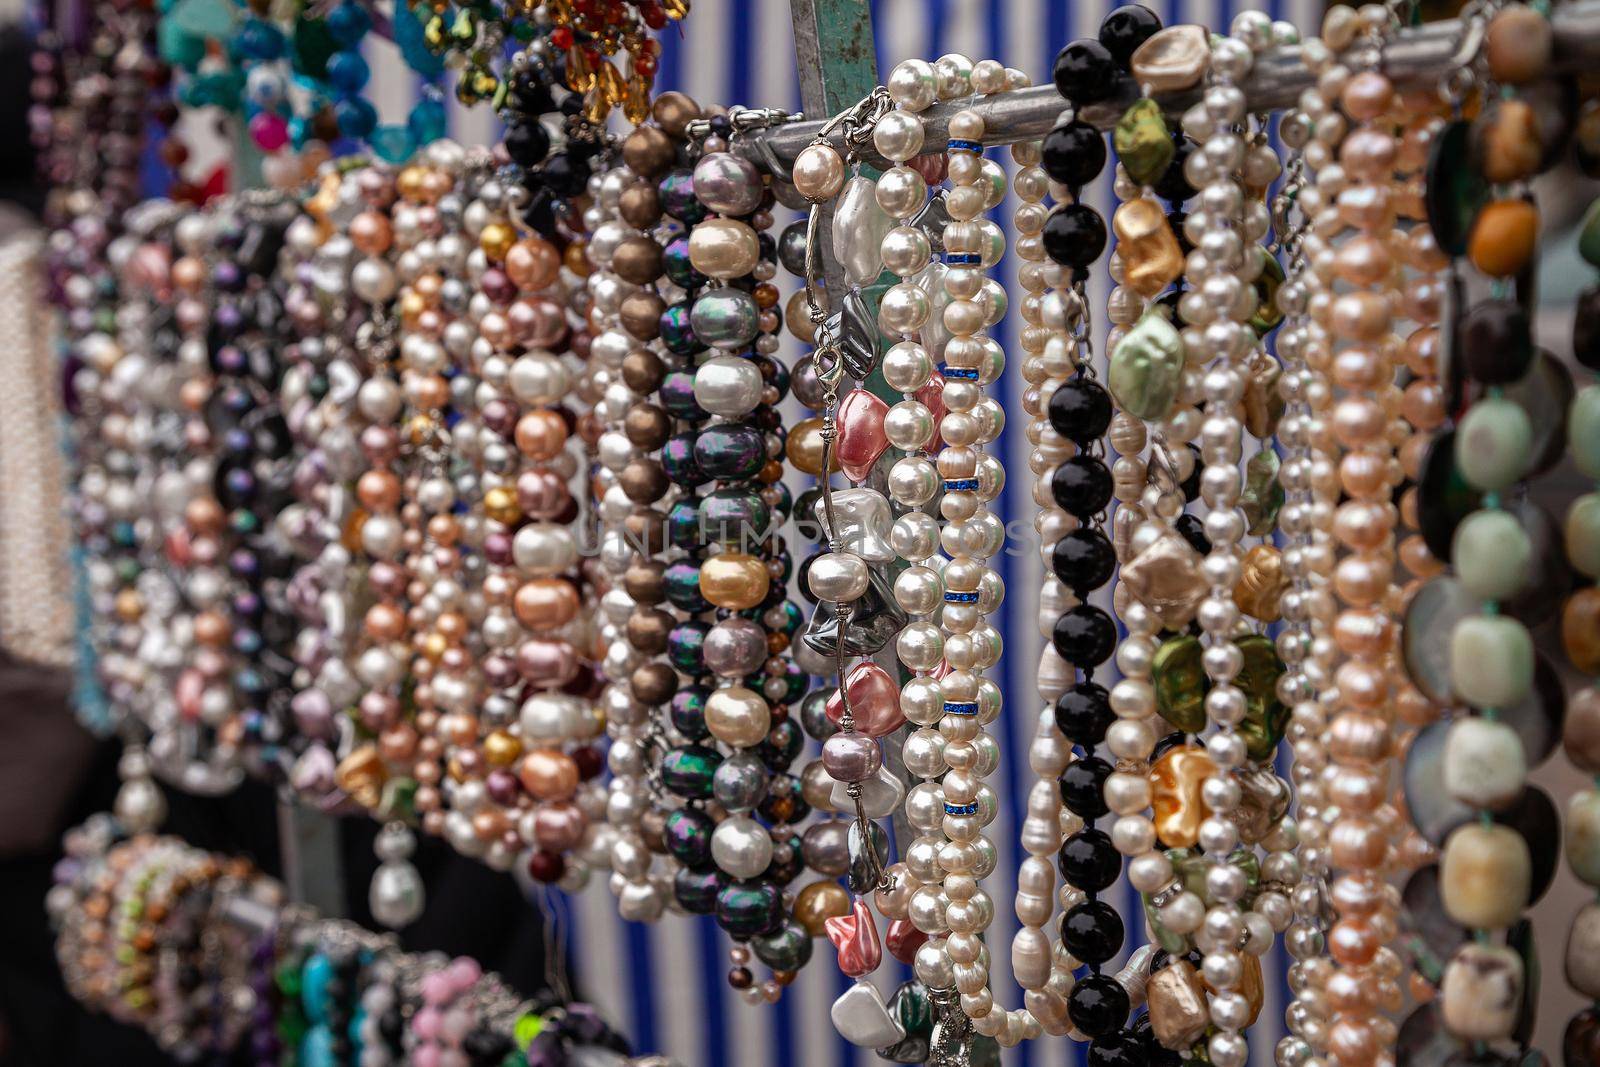 Various colorful beads in the market. Wallpaper background of a colorful necklace made of precious stones and colored beads. Semi-precious jewelry.